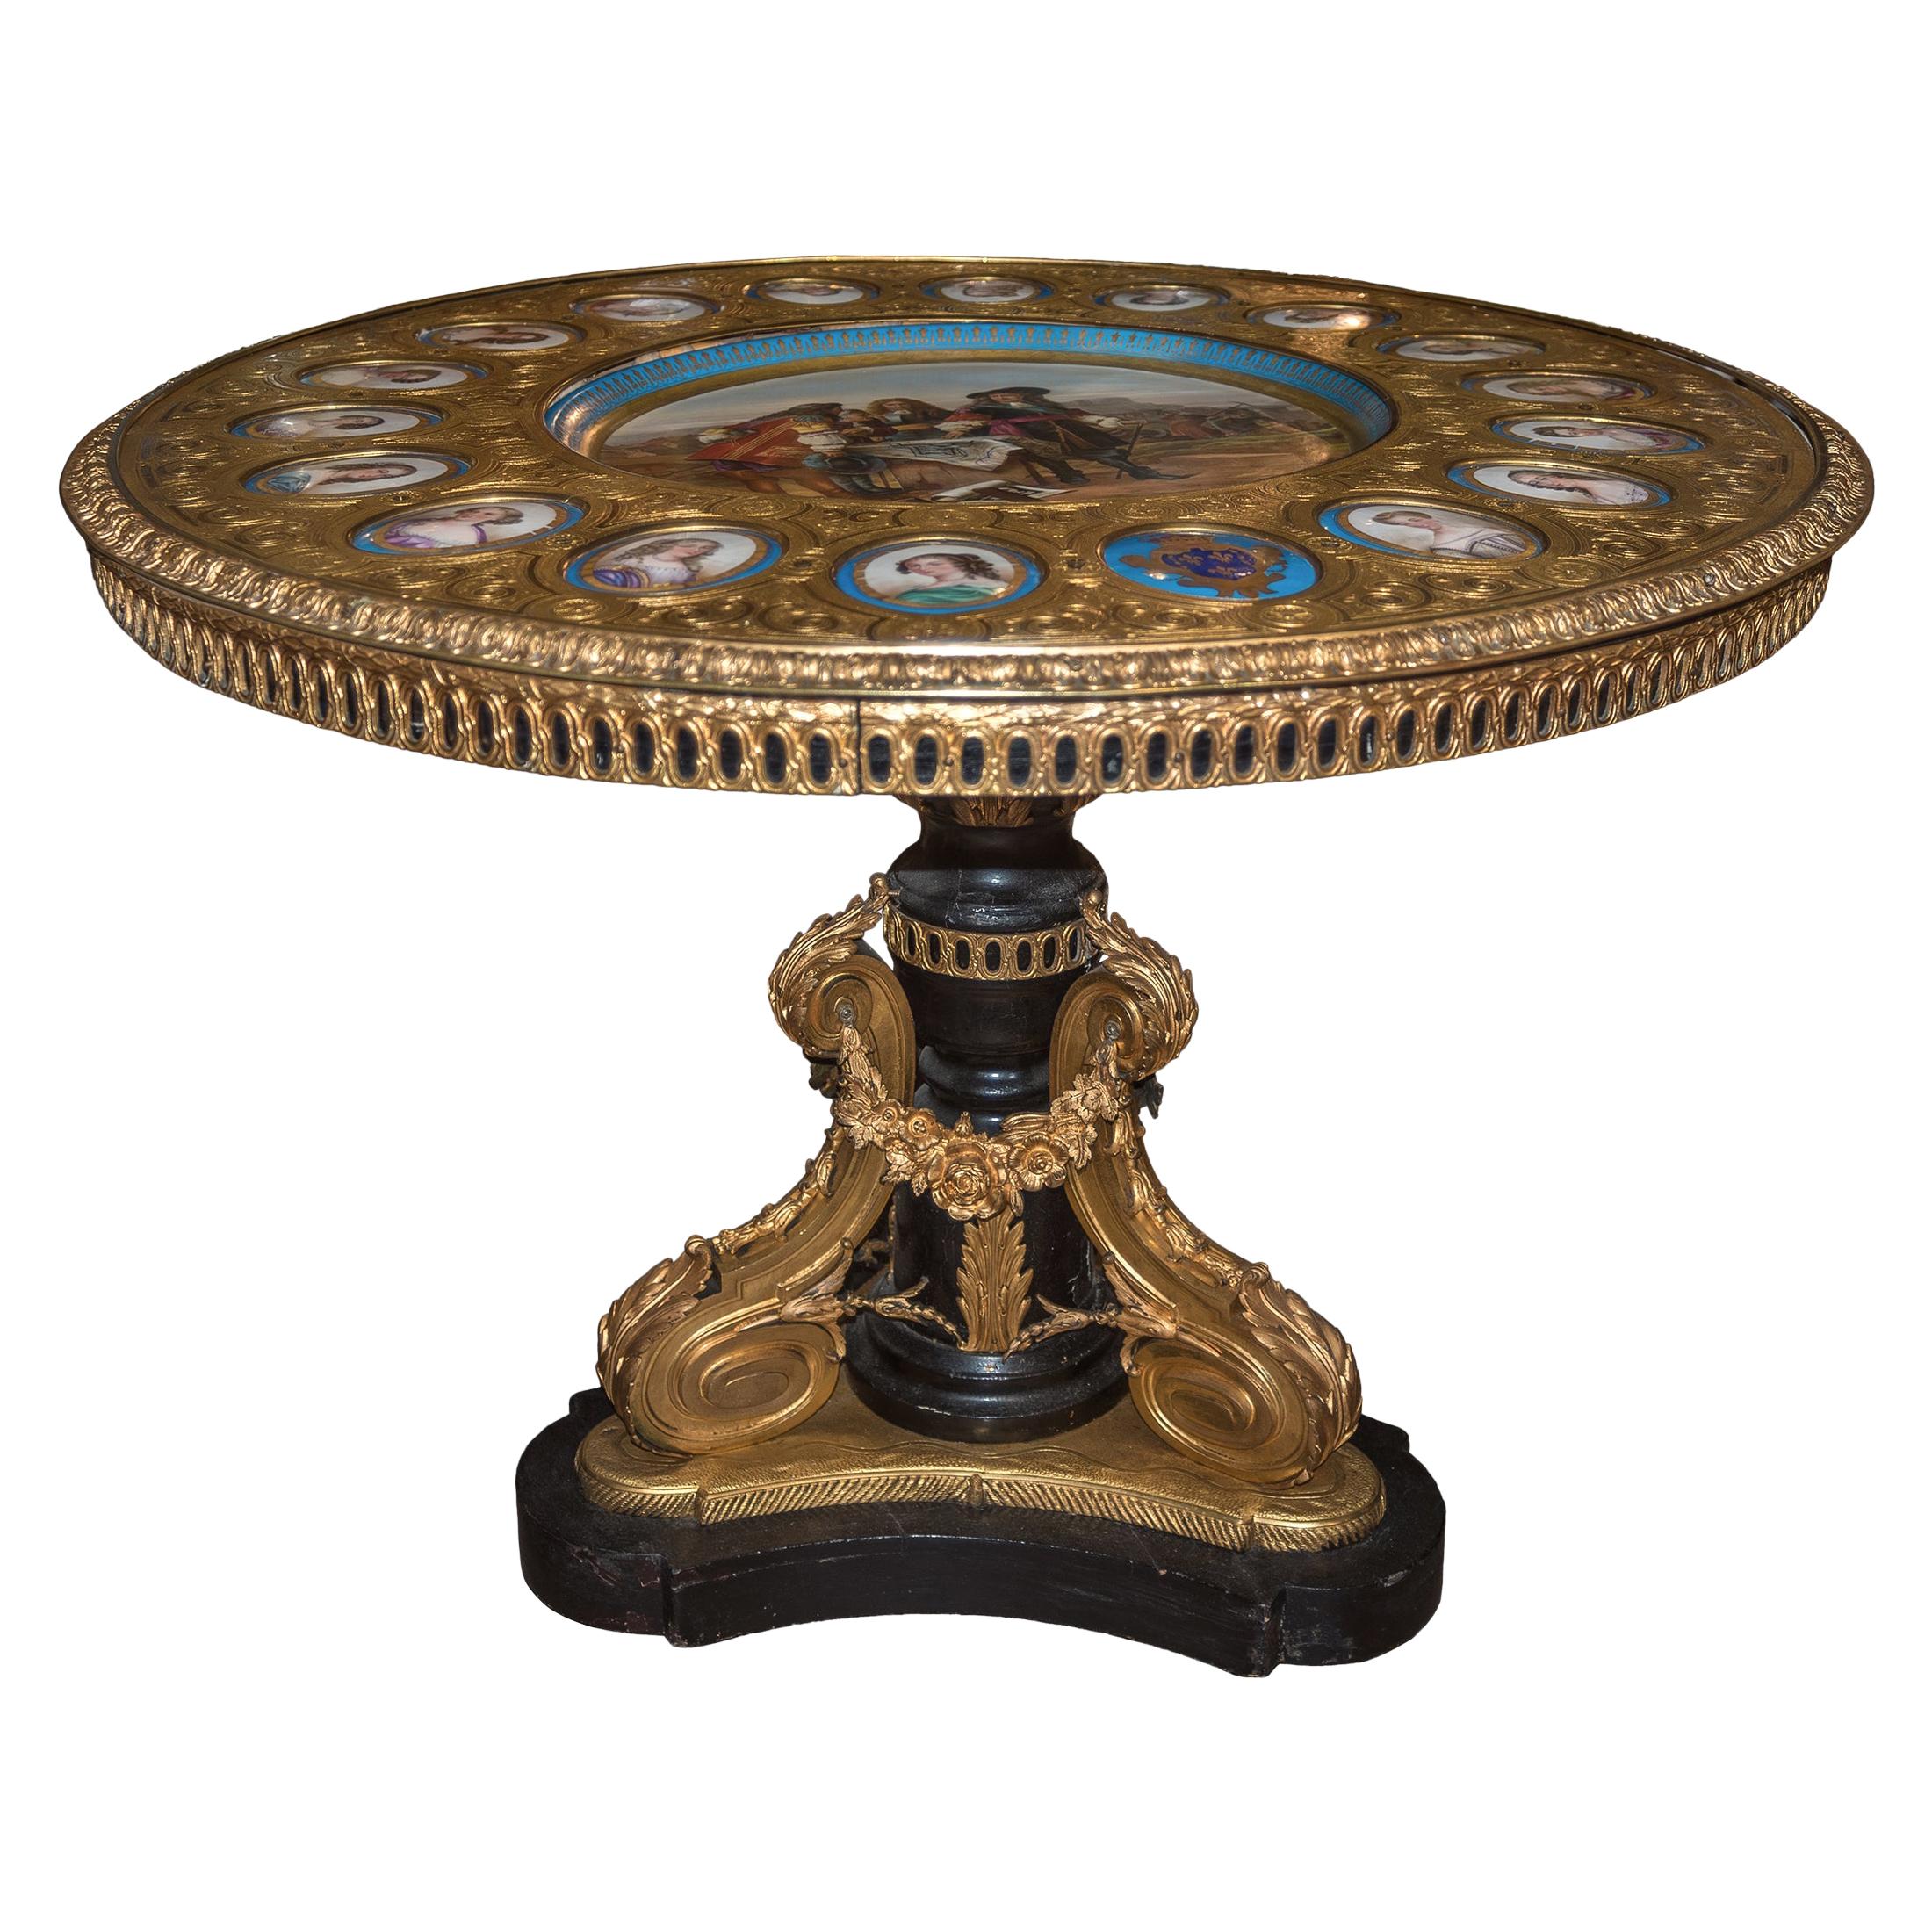 French Ormolu-Mounted Painted Wood and Sevres Porcelain Guéridon